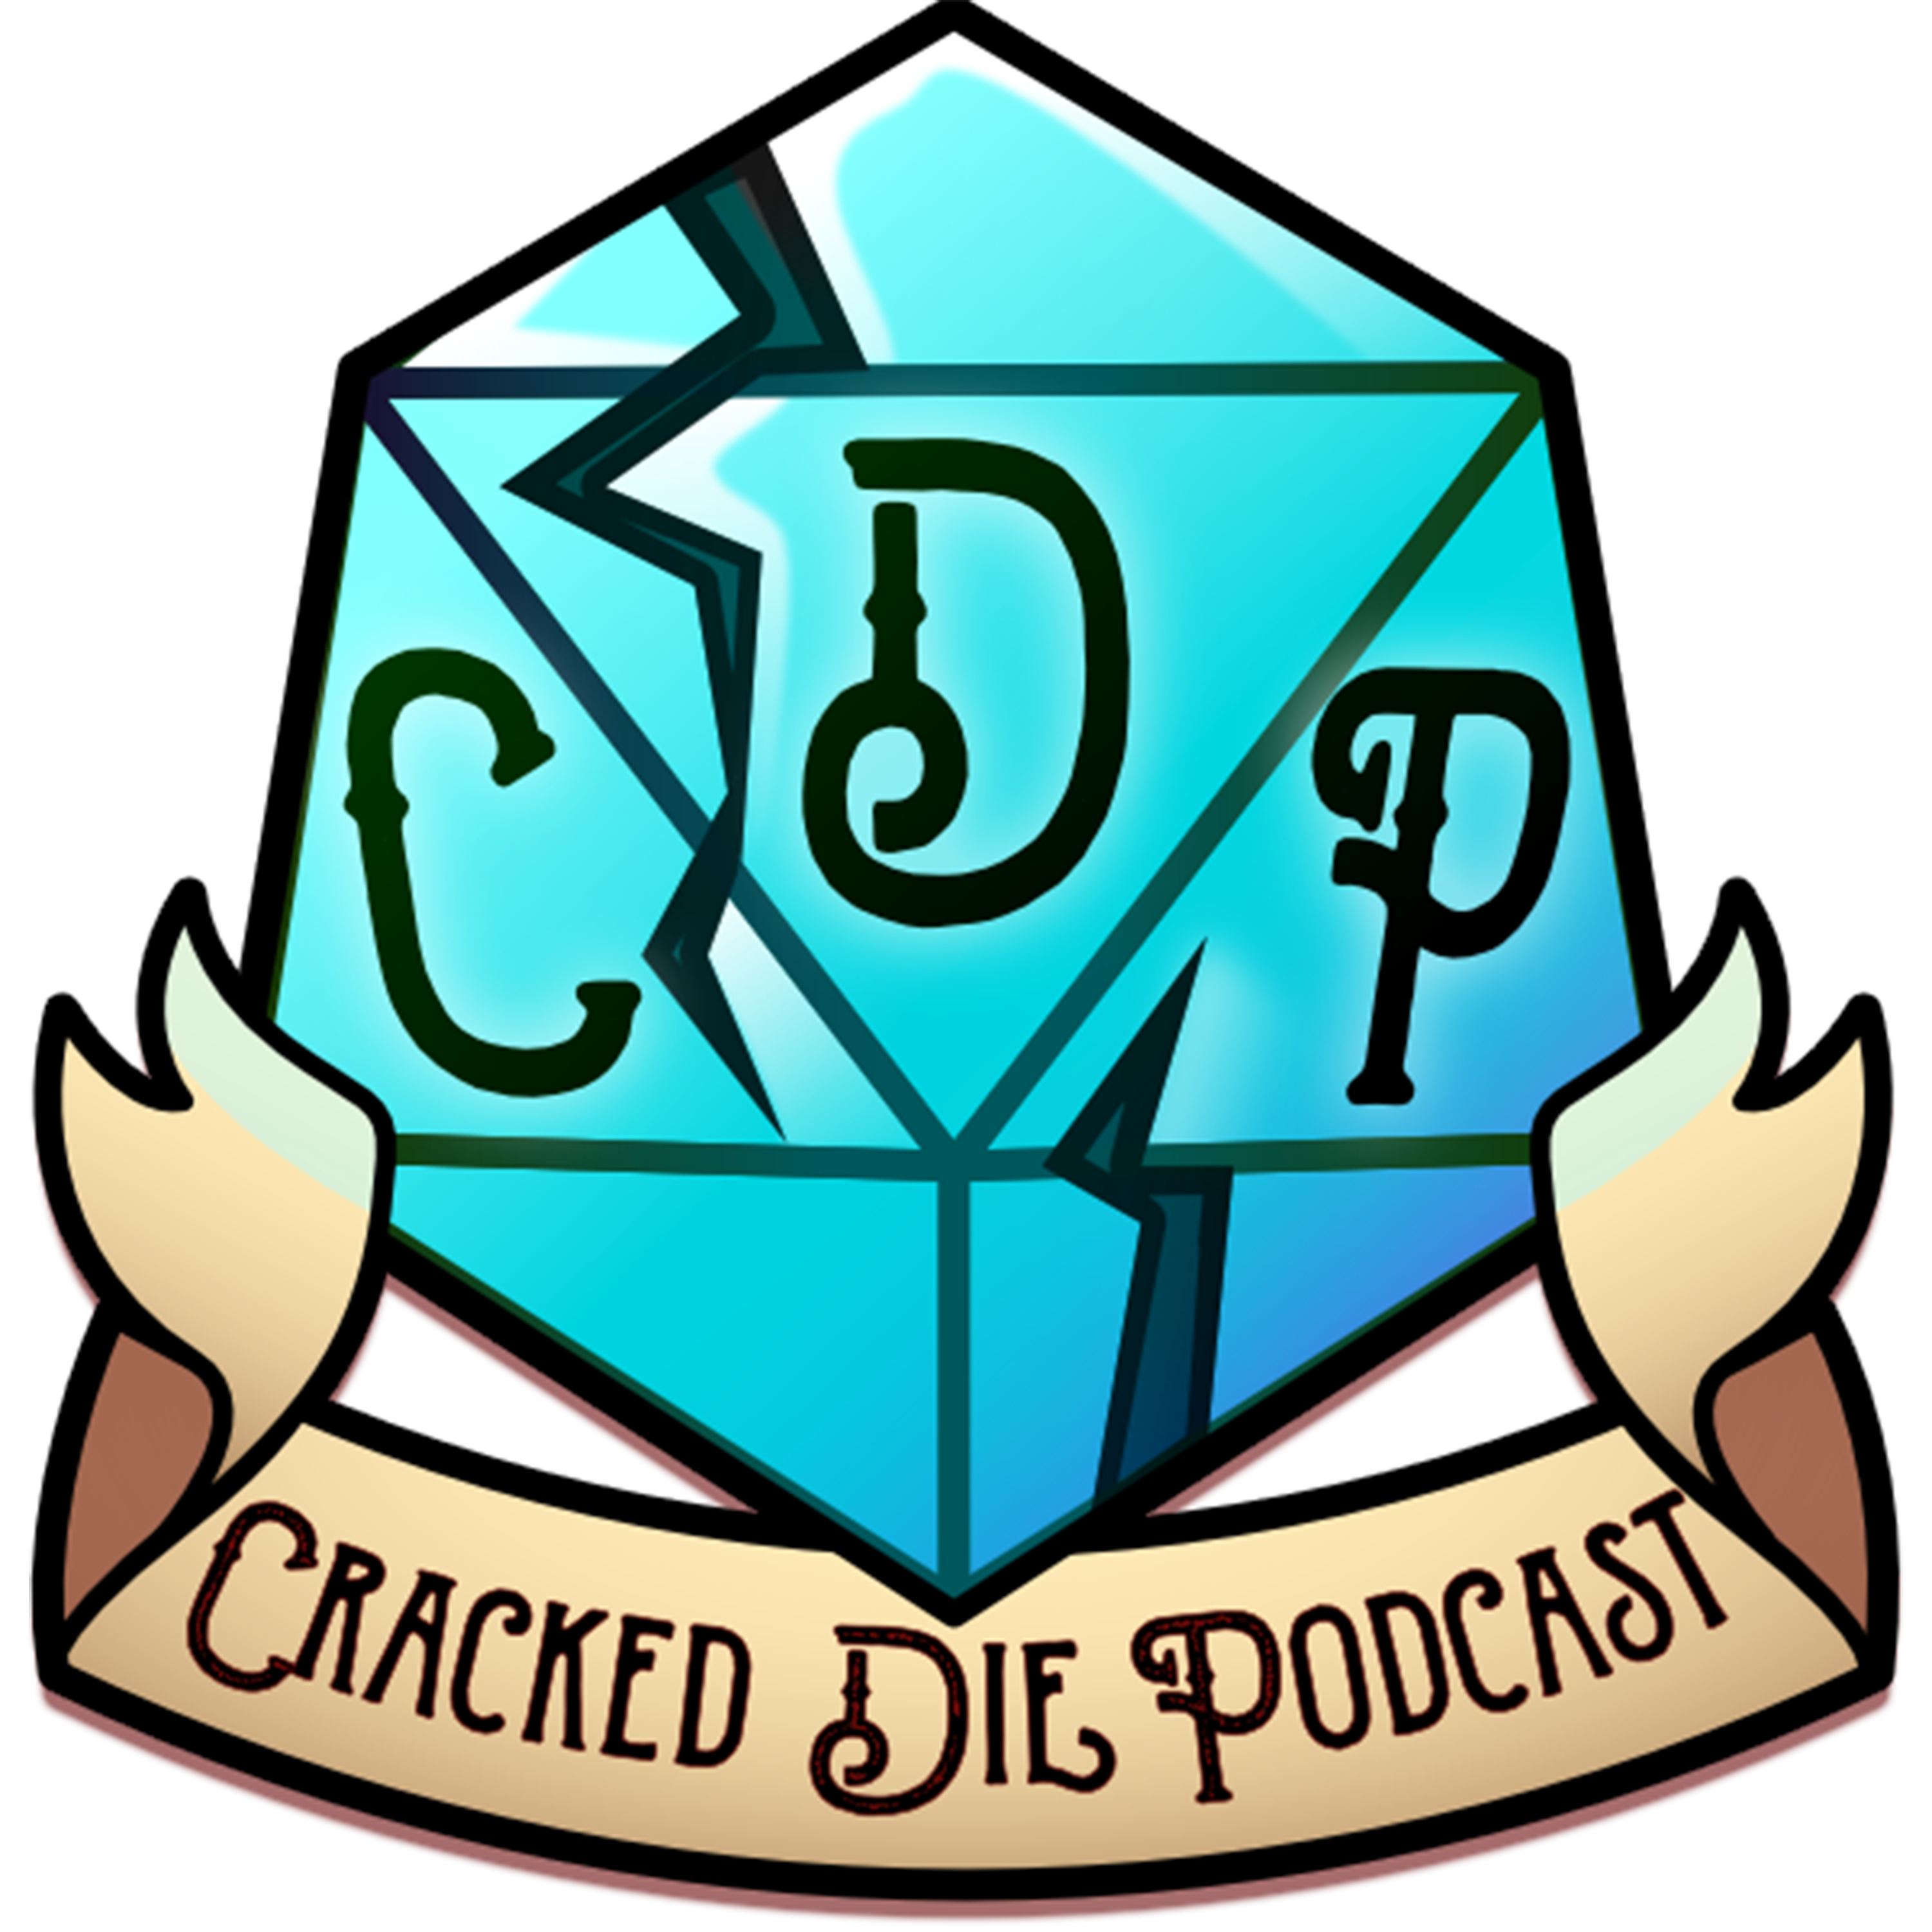 The Cracked Die Podcast - Episode 27 - The Bad Touch